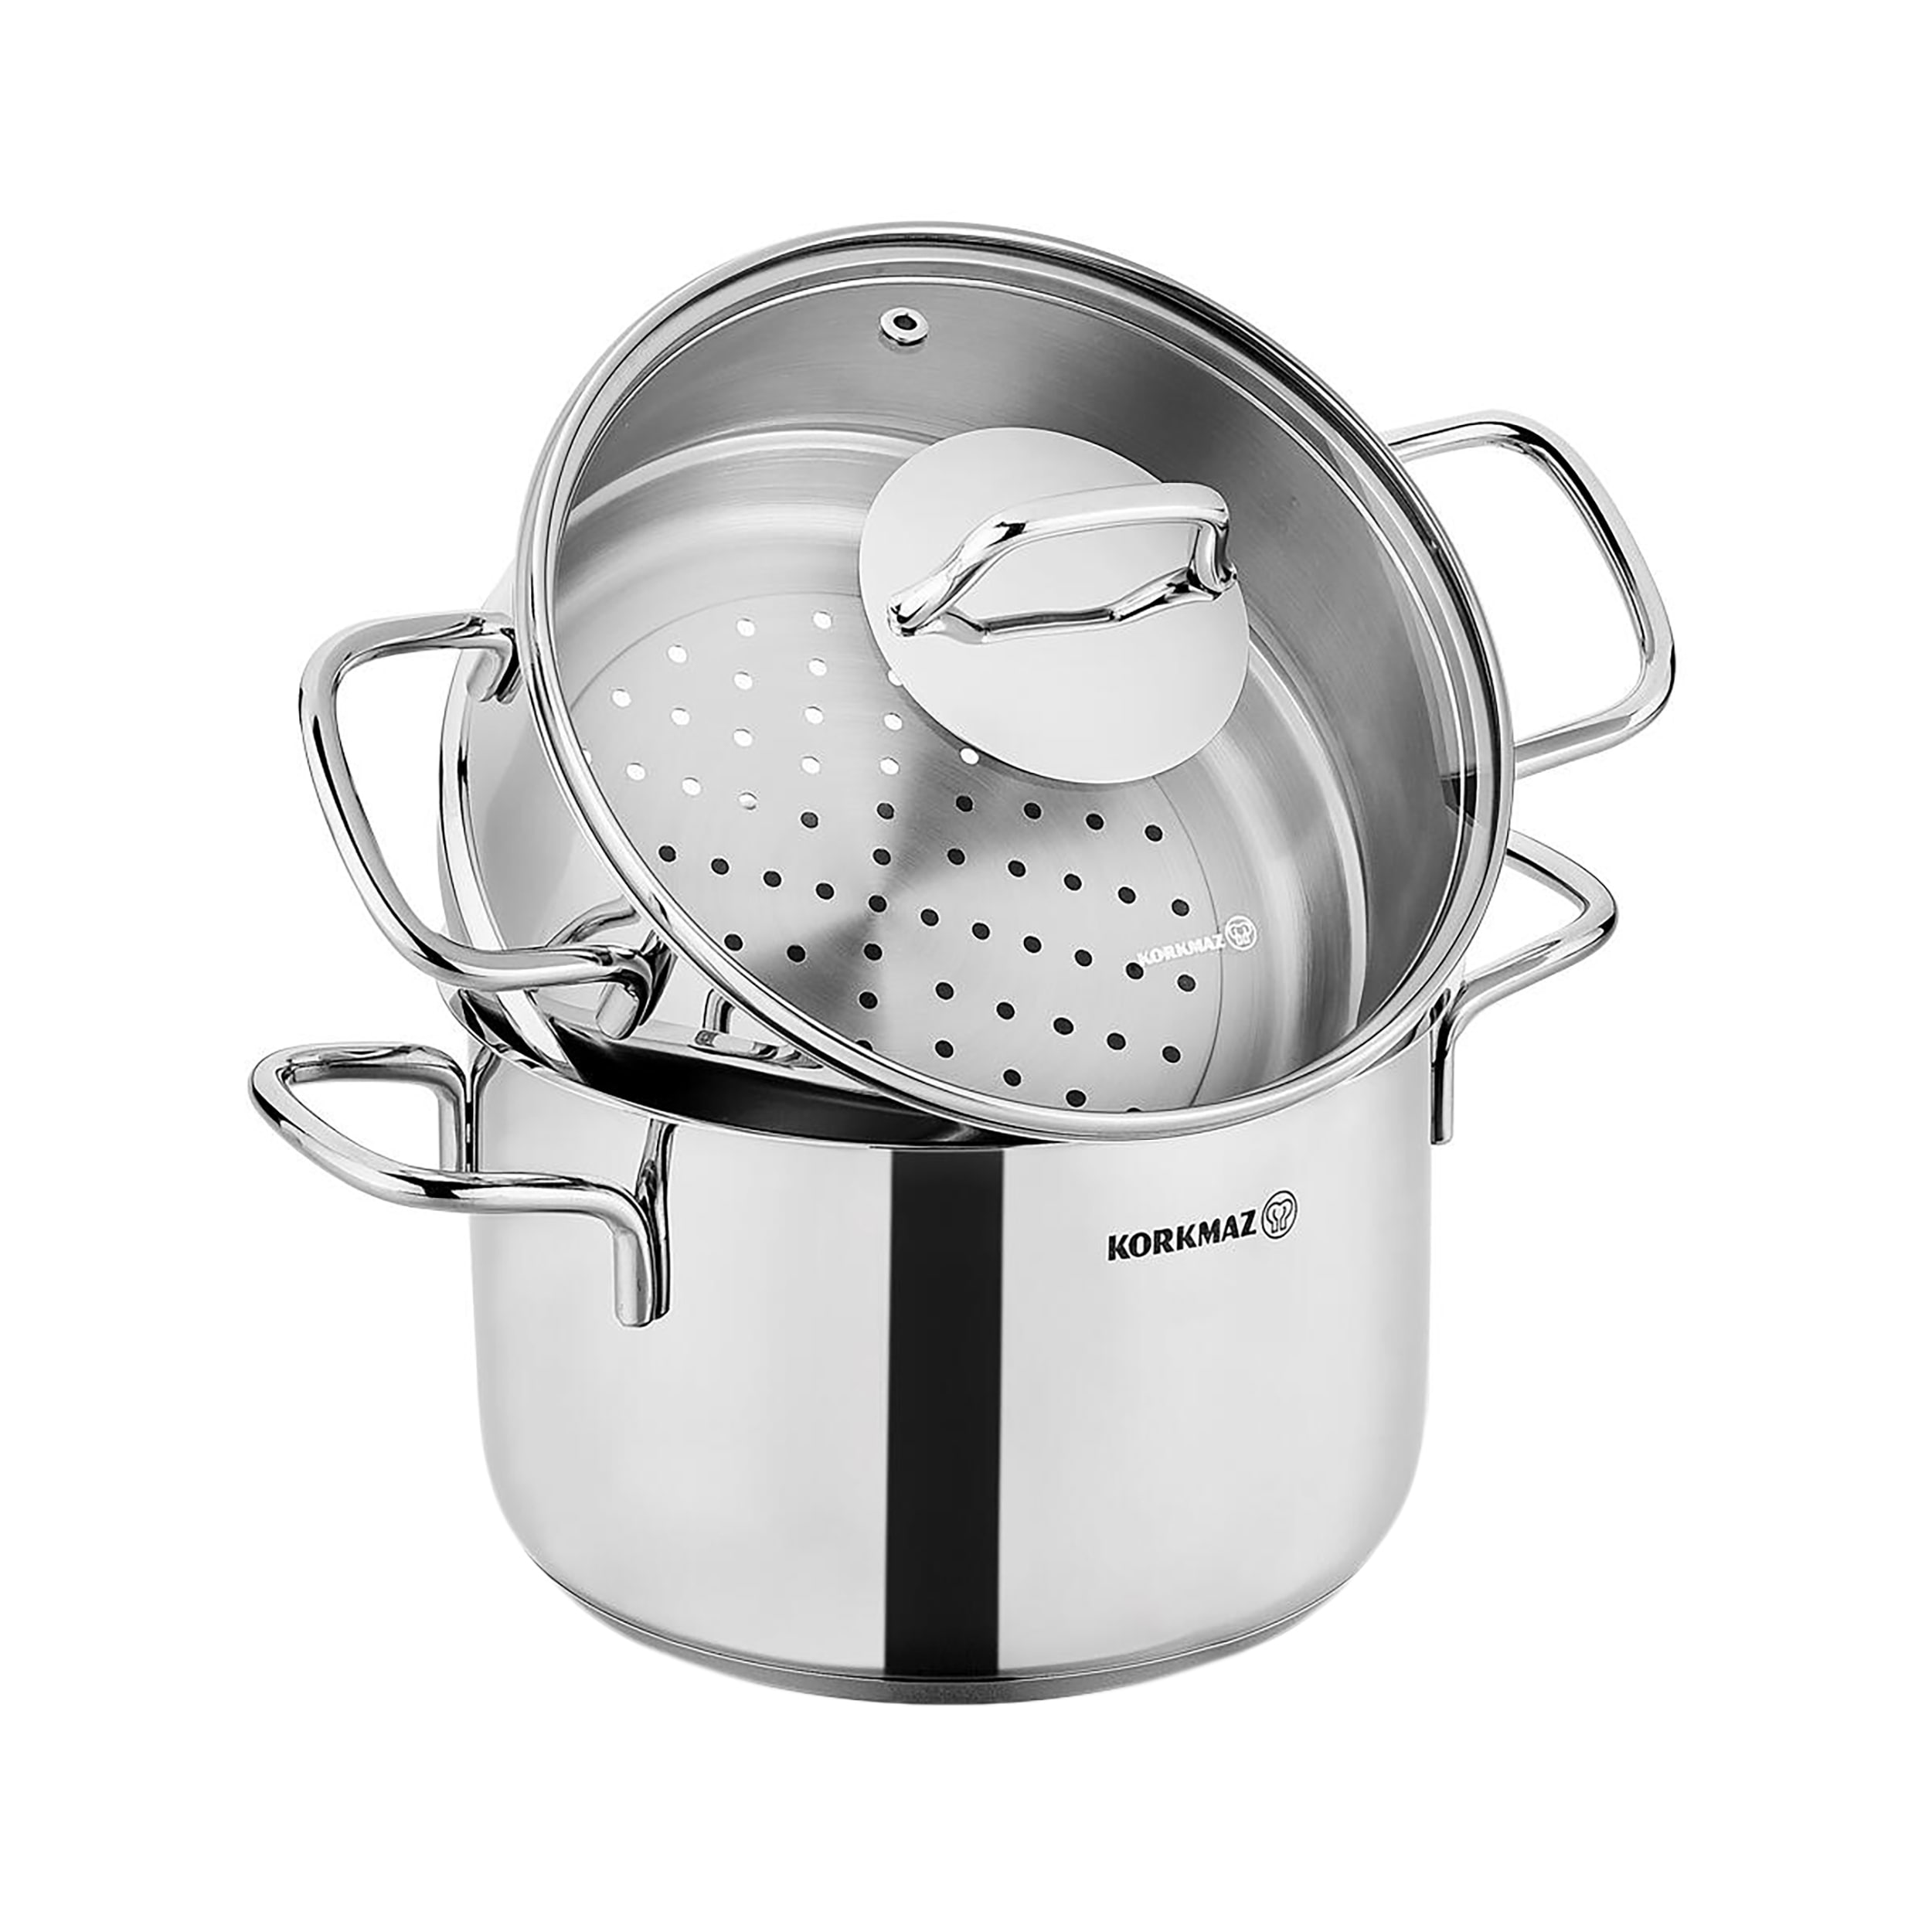 https://ak1.ostkcdn.com/images/products/is/images/direct/1ffc14931d295f40cd080911377aef526aba82a4/3-Piece-3.5-Liter-Stainless-Steel-Casserole-Steamer-with-Lid-in-Silver.jpg